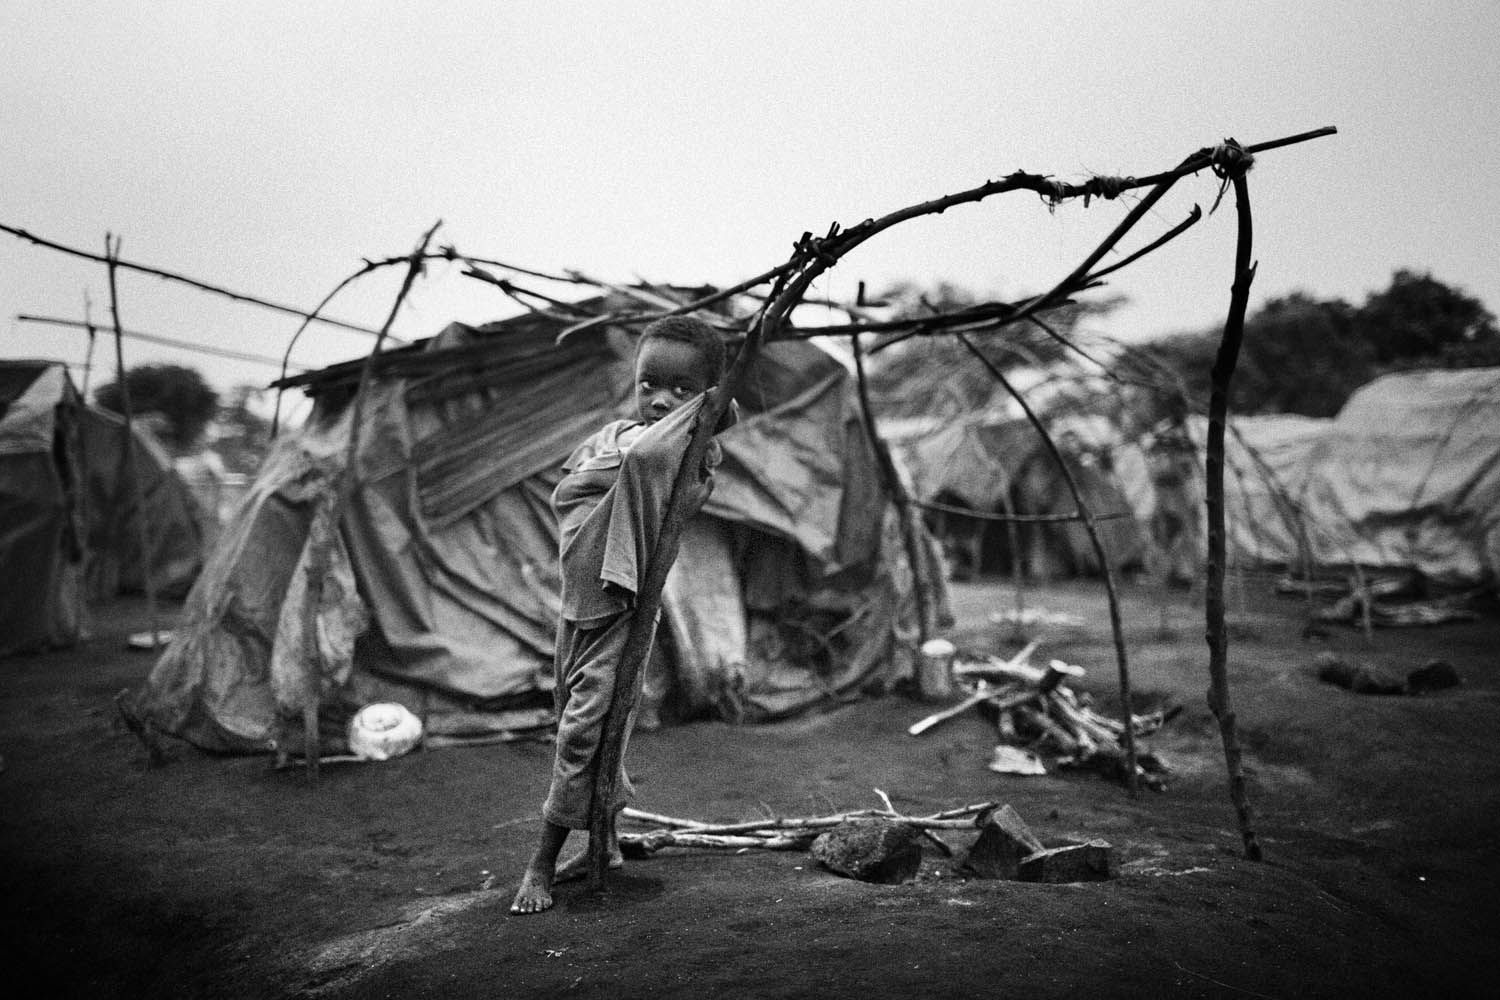 Opangi Molati, 5, in Tchomia camp after being displaced by nearby fighting, 2006.  This is also where the Pastor introduced me to his brother, who will be donating his kidney.